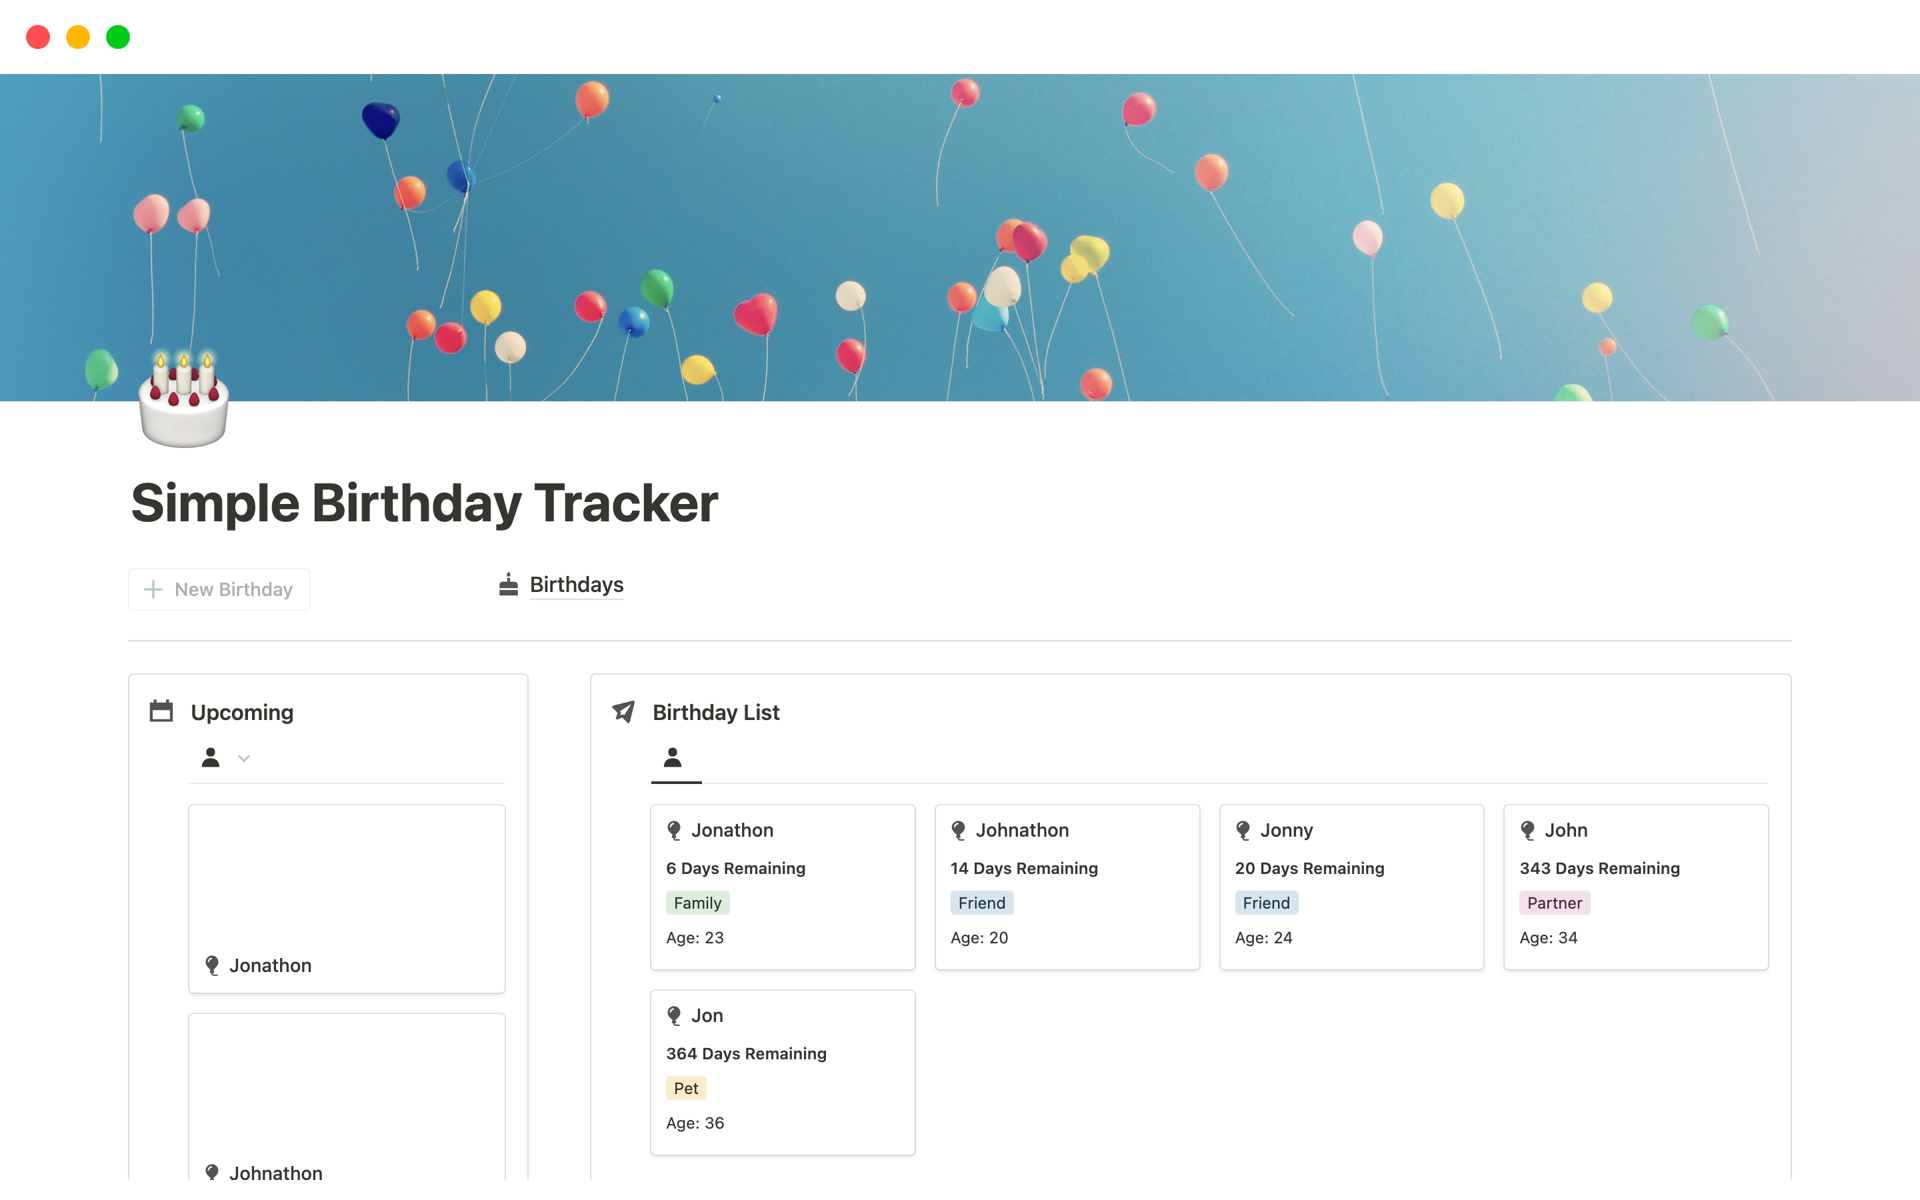 Never forget birthdays anymore. This Simple Birthday Tracker lets you know of upcoming birthdays, gift ideas, and has birthday card/email outlines.